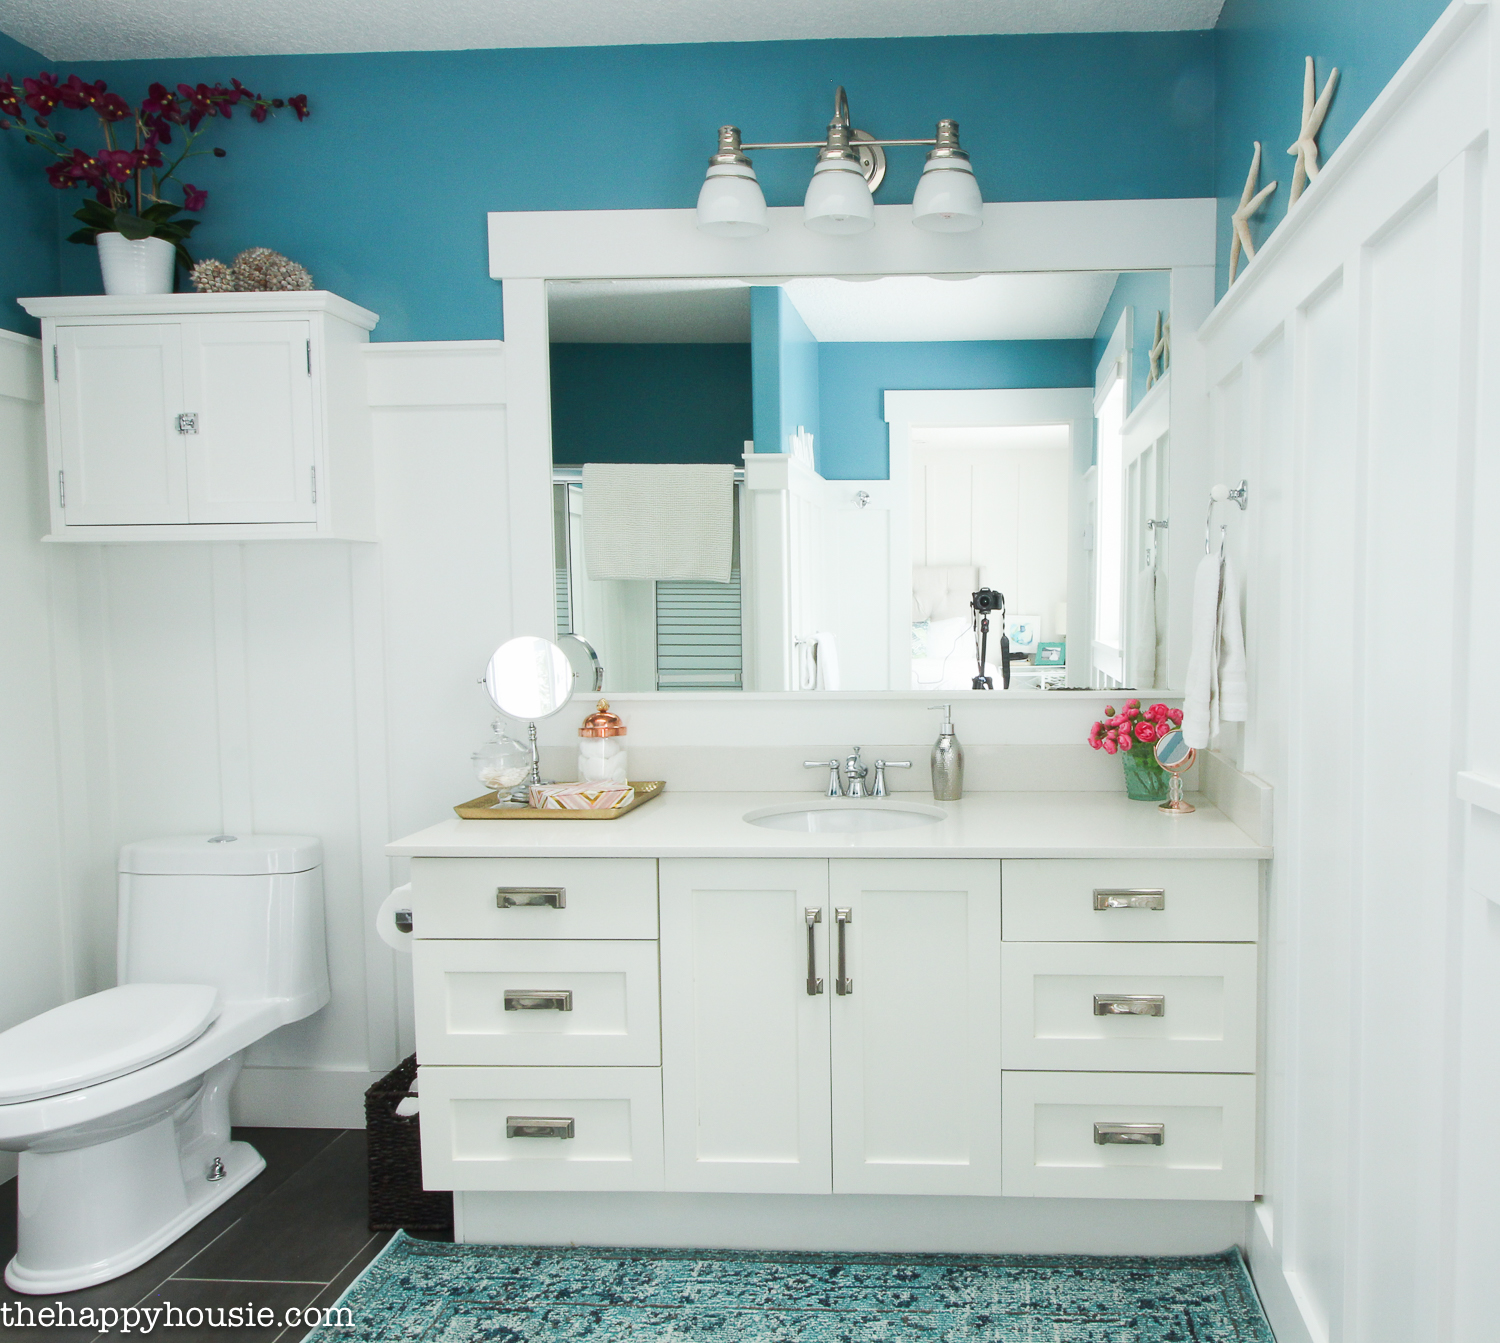 Blue bathroom walls with white cabinets.